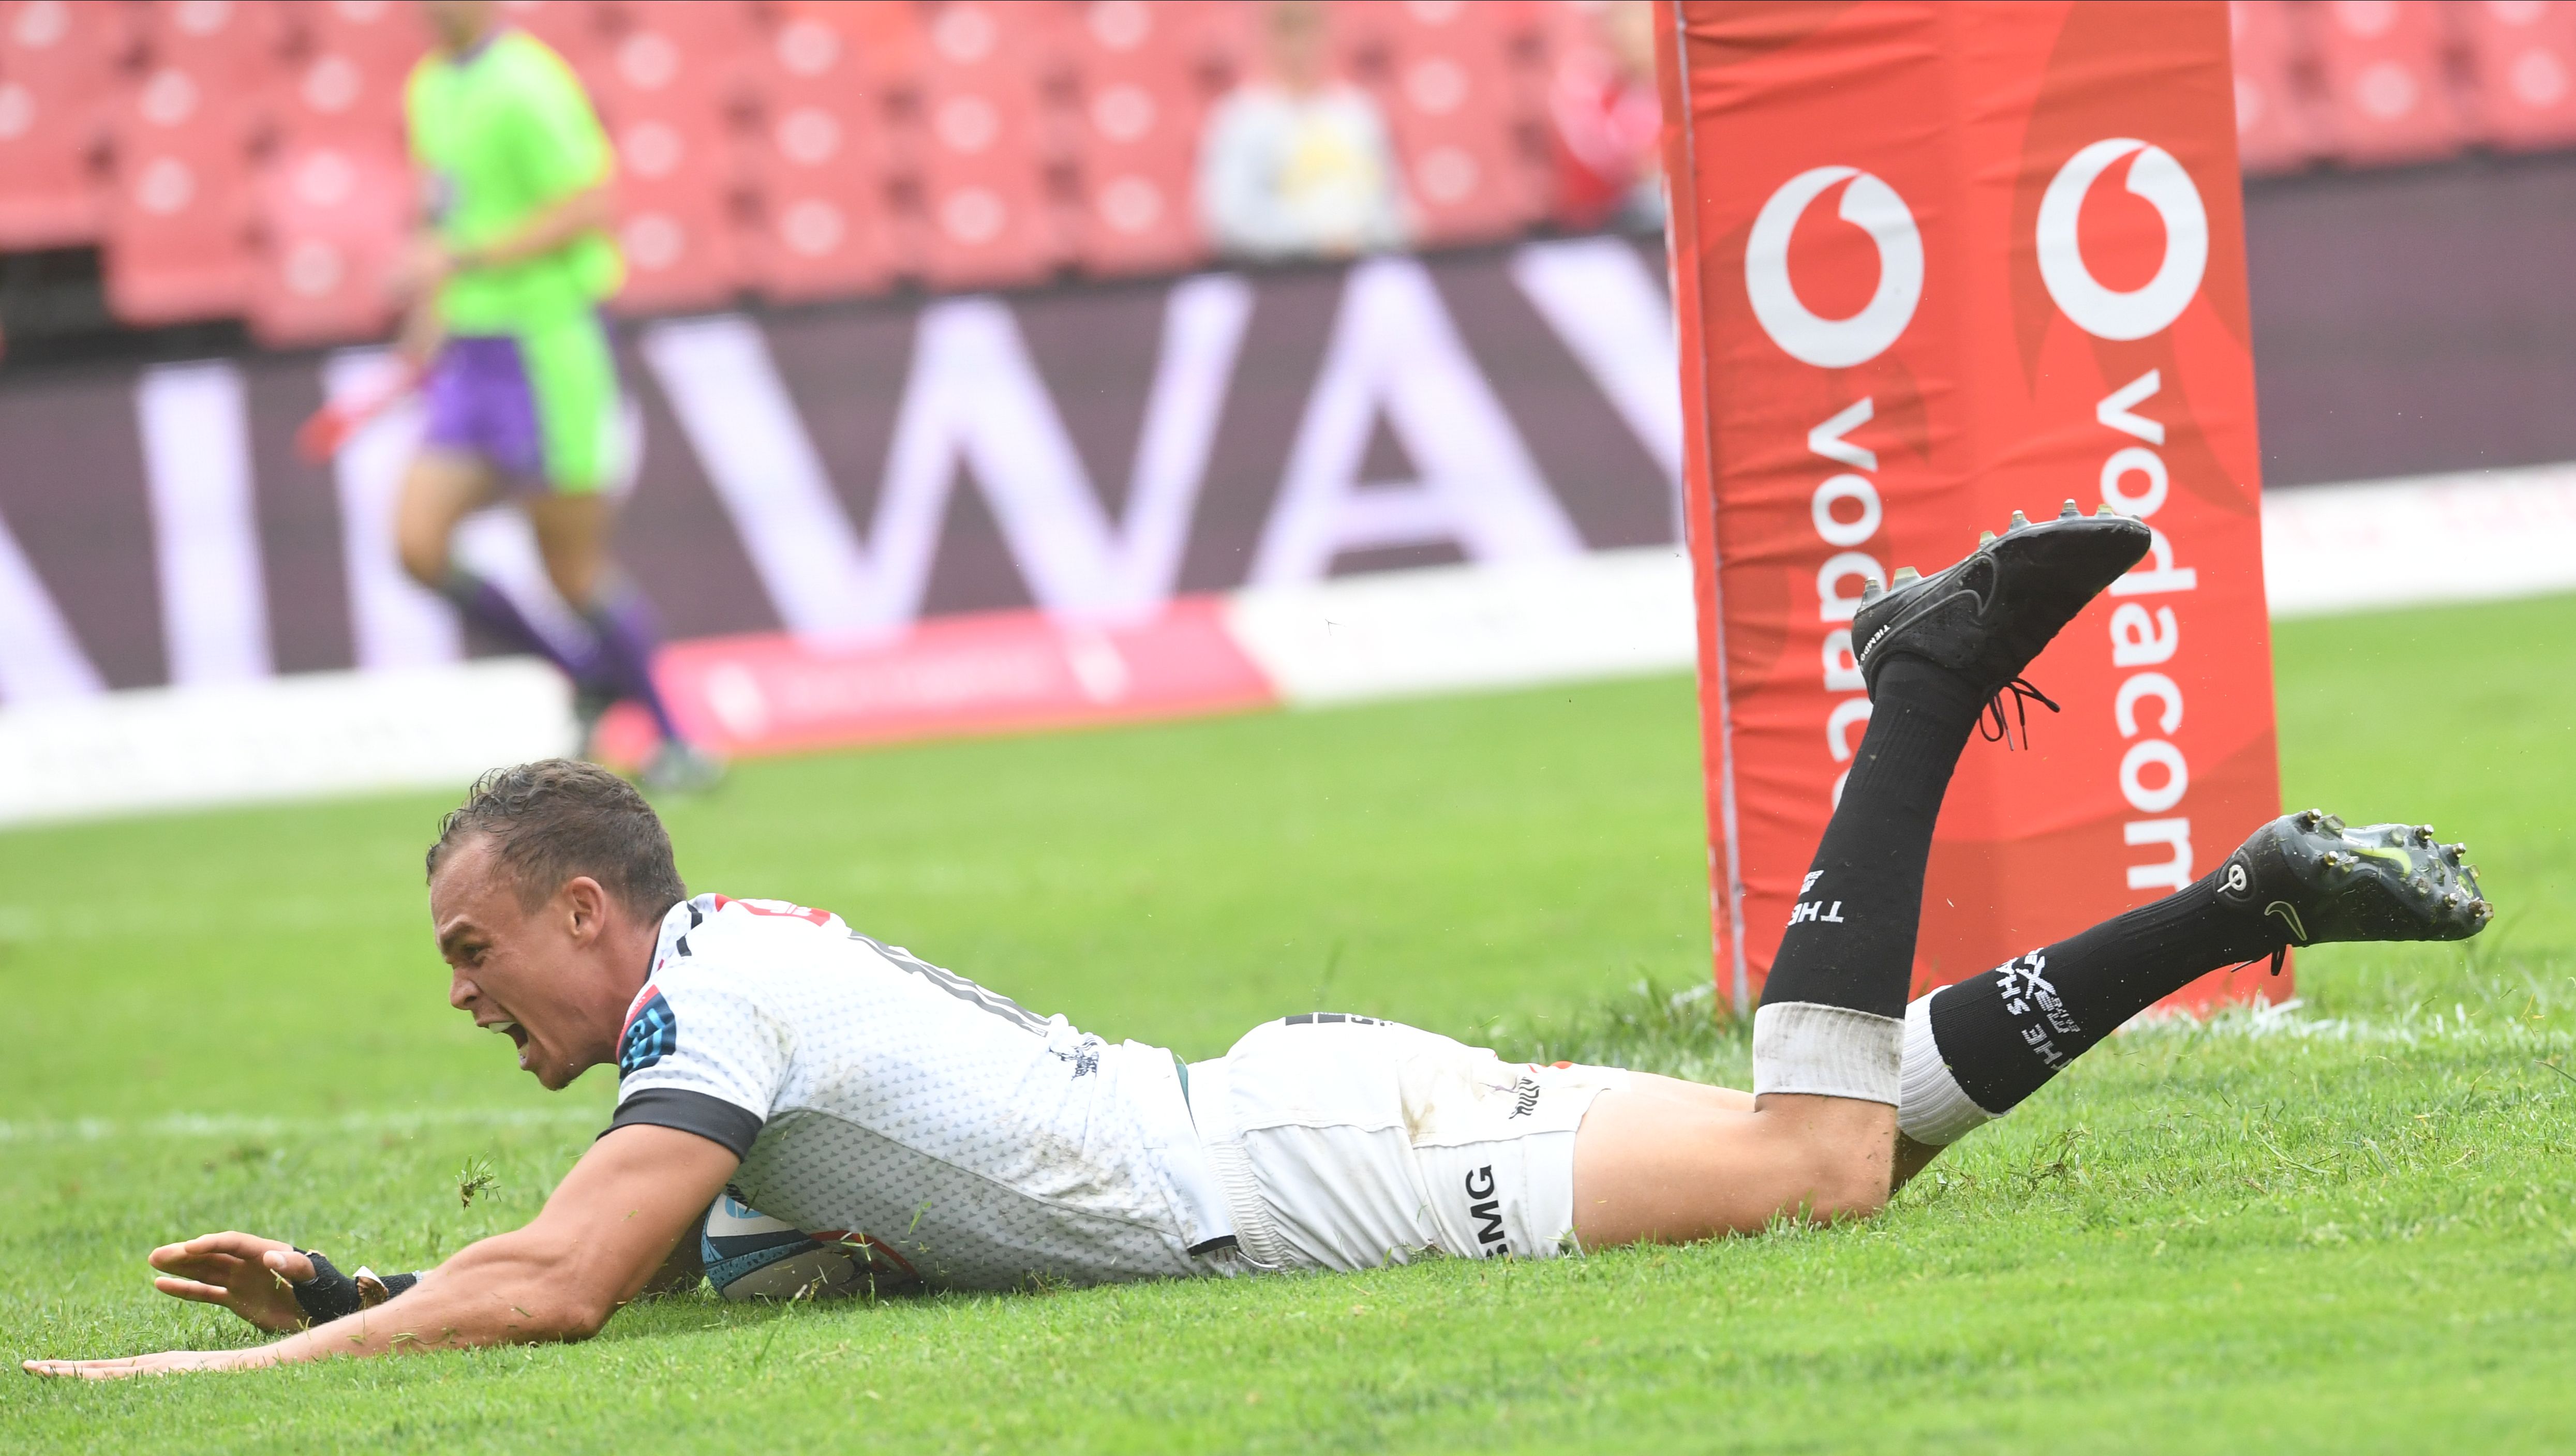 JOHANNESBURG, SOUTH AFRICA - FEBRUARY 18: Curwin Bosch of the Sharks breaks away from the Lions defence, score a try and celebrate with teammates during the United Rugby Championship match between Emirates Lions and Cell C Sharks at Emirates Airline Park on February 18, 2023 in Johannesburg, South Africa.